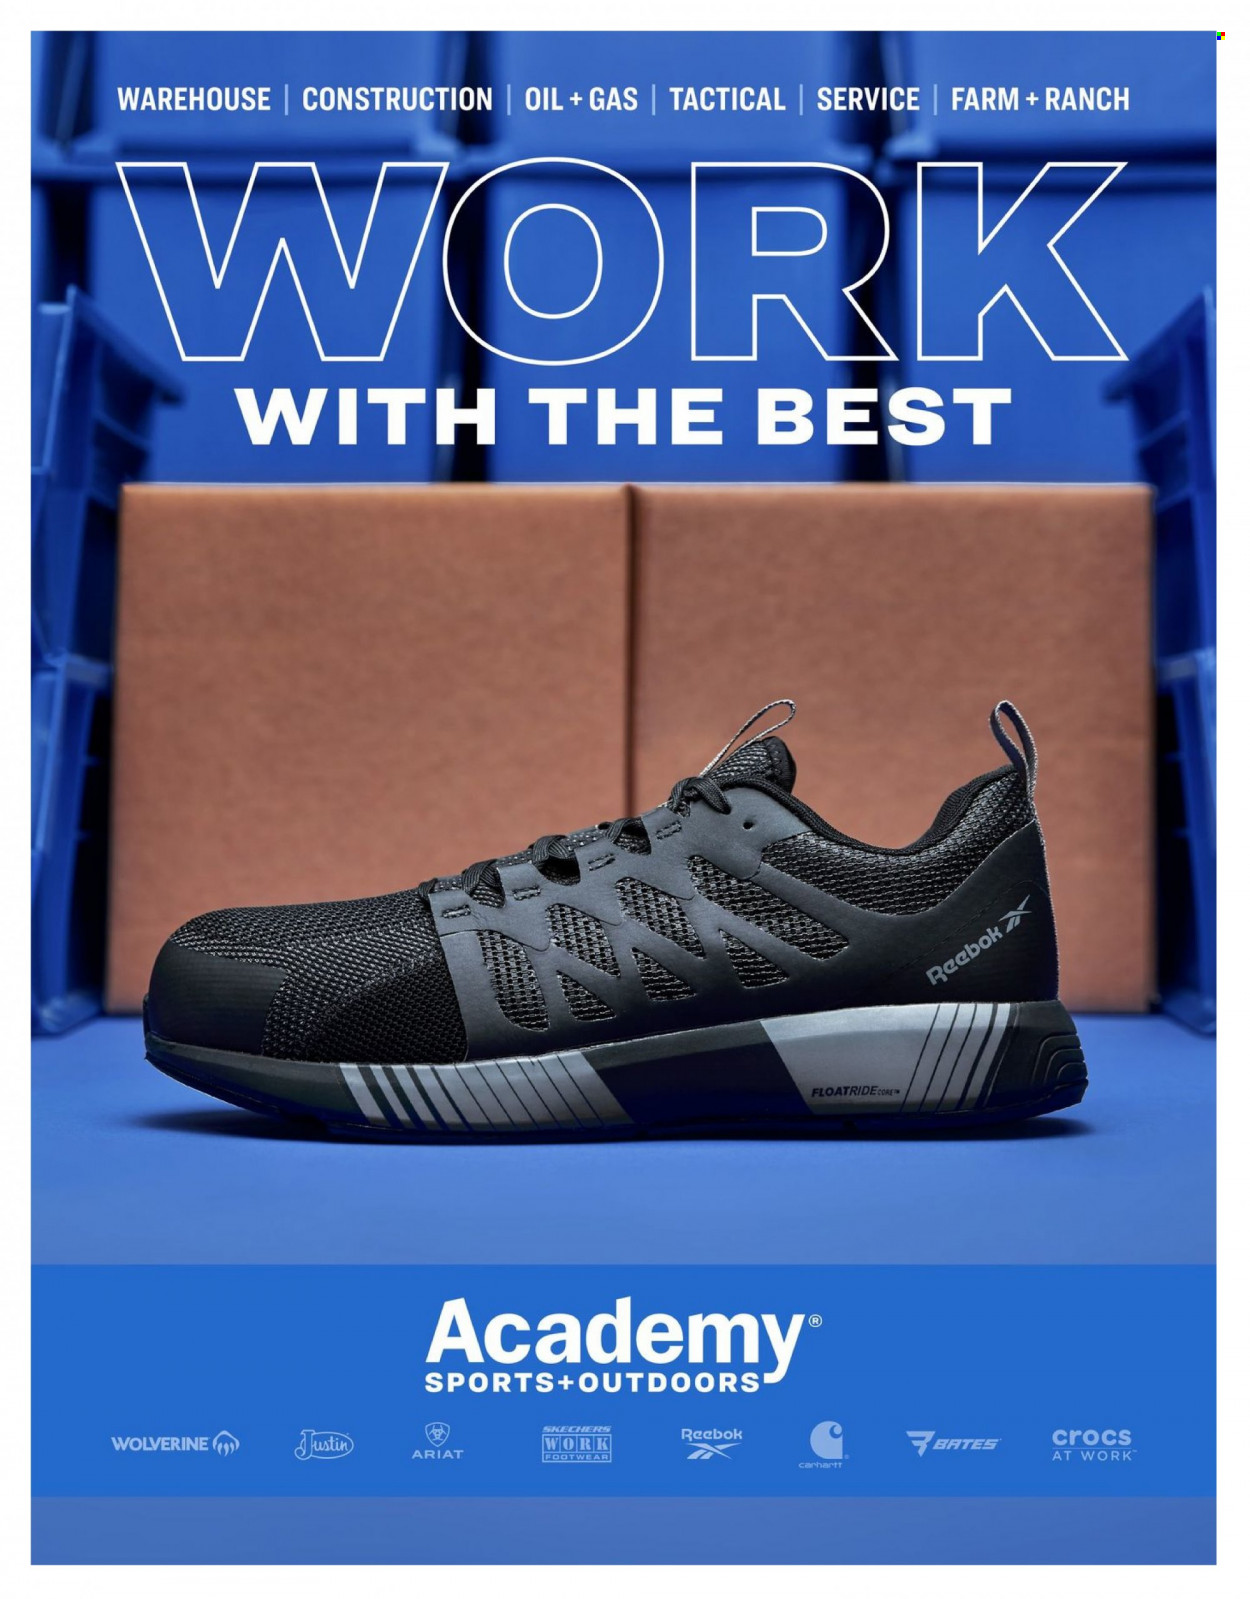 Academy Sports + Outdoors ad .